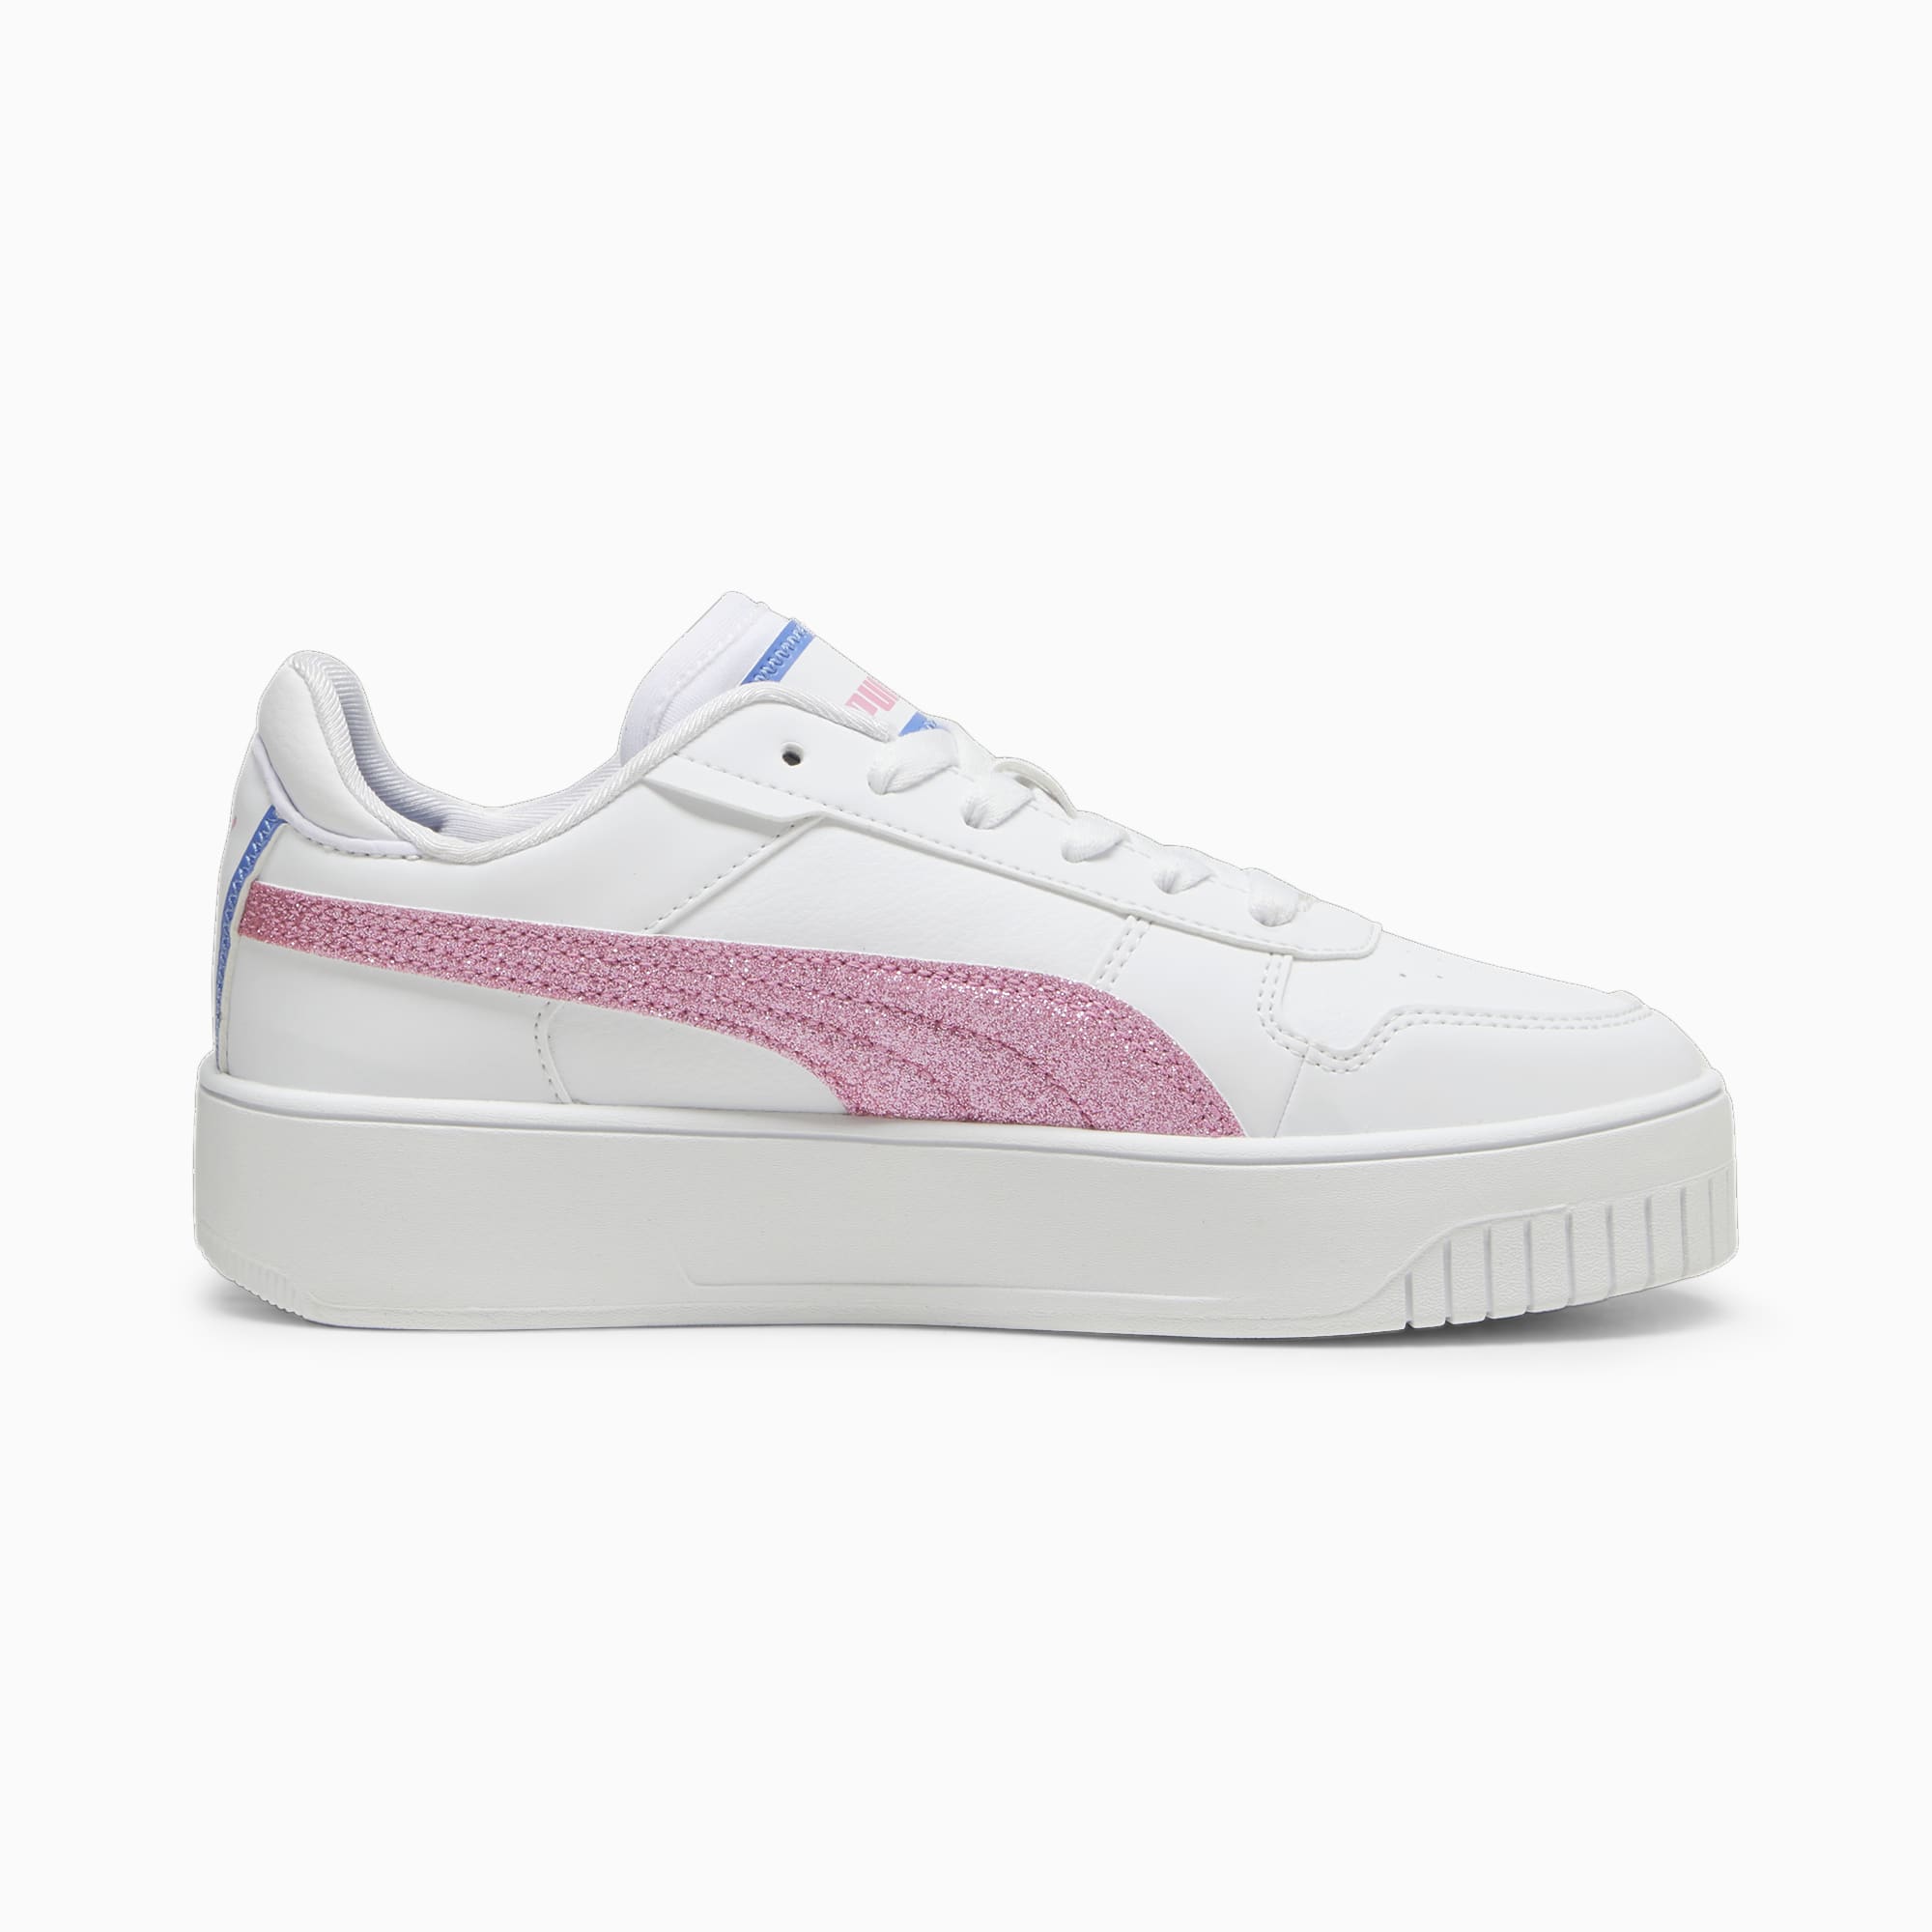 PUMA Carina Street Deep Dive Youth Sneakers, White/Fast Pink/Blue Skies, Size 35,5, Shoes